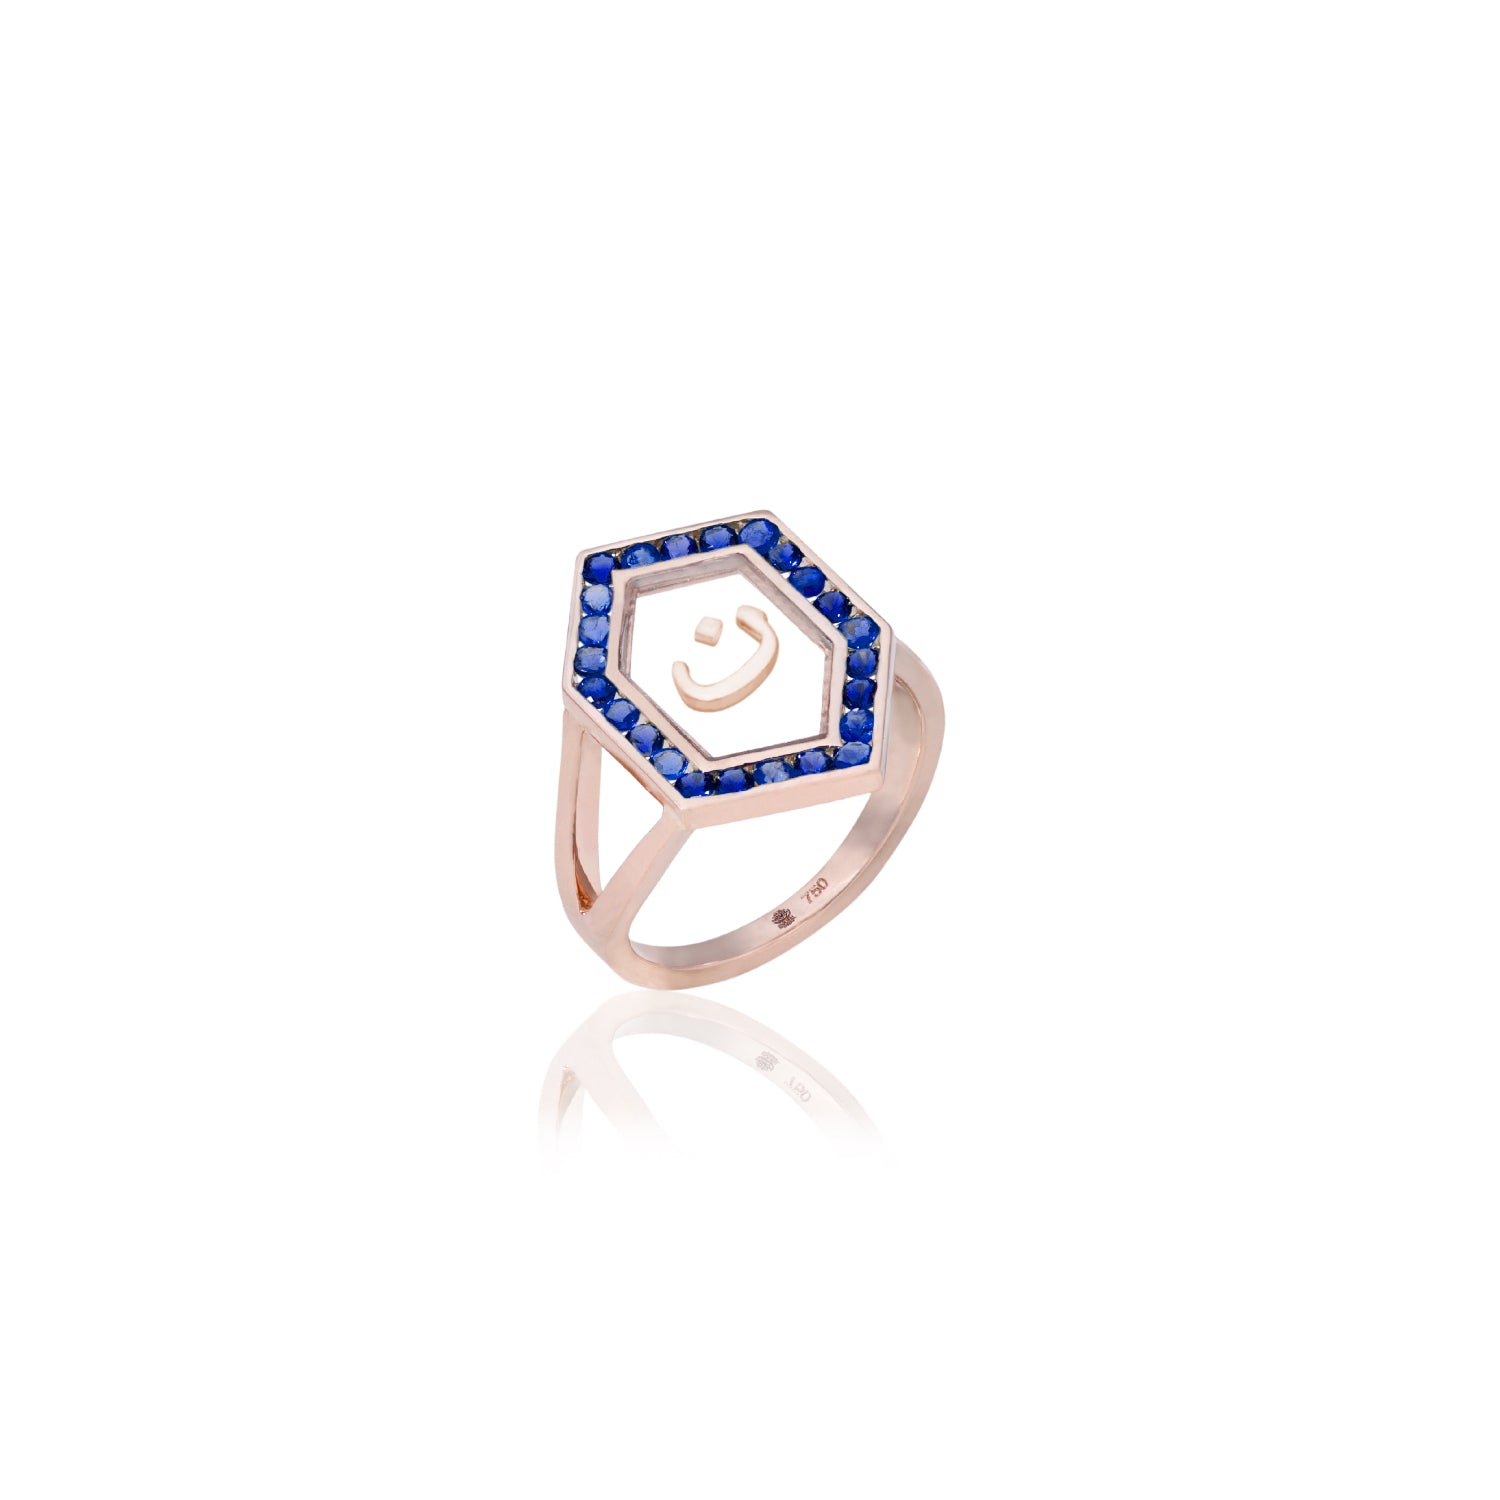 Qamoos 1.0 Letter ن Sapphire Ring in Rose Gold